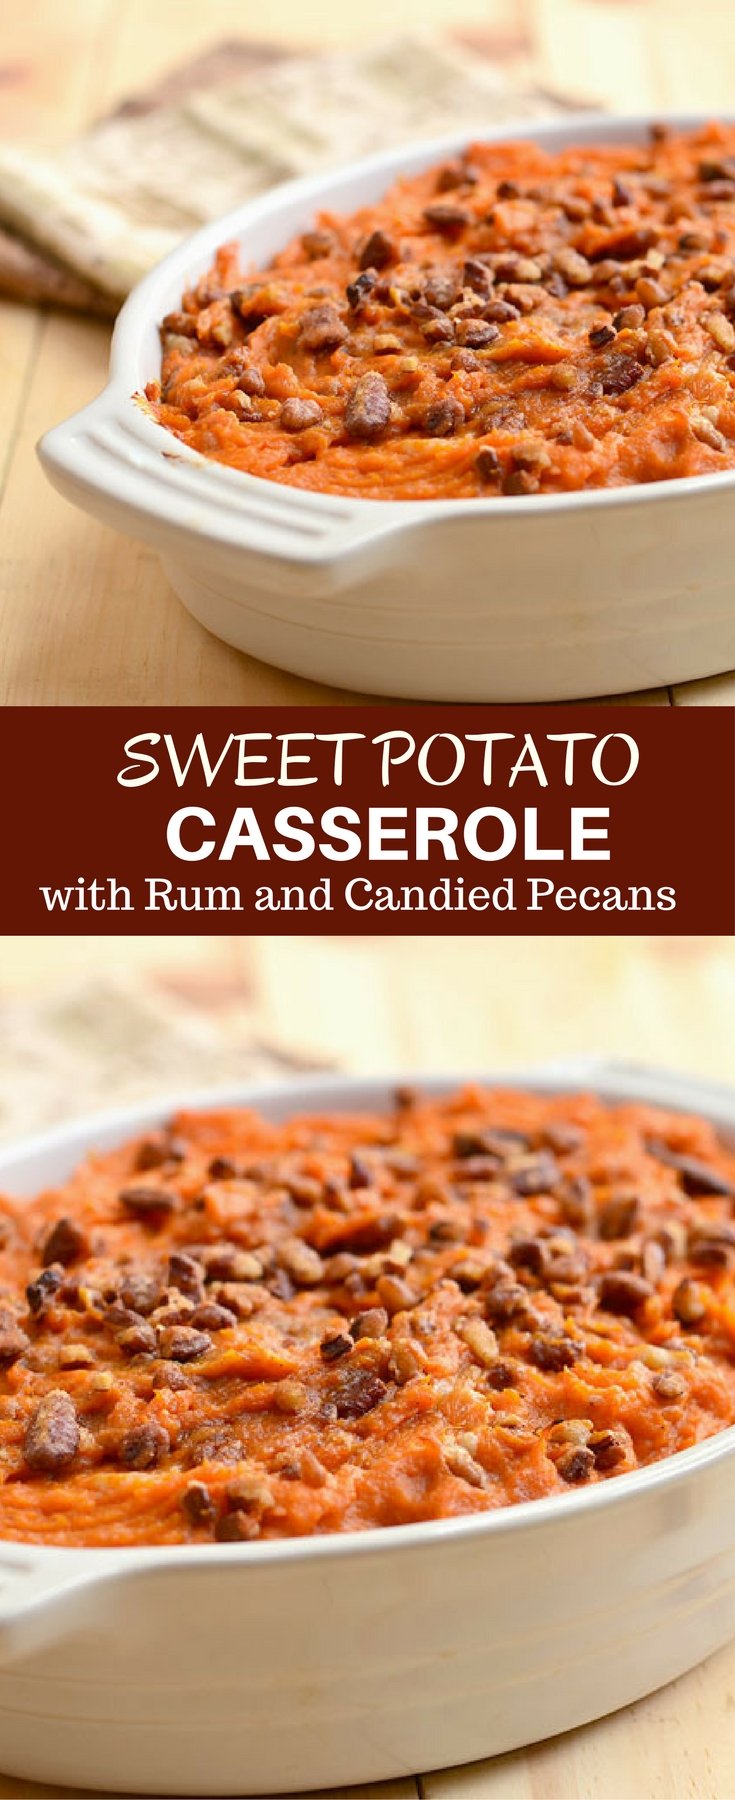 Sweet Potato Casserole with Rum and Candied Pecans is a must-have holiday side dish. Fluffy and creamy with a spike of rum flavor and crunchy sweet pecan topping, it's the perfect accompaniment to Thanksgiving turkey or Christmas ham.